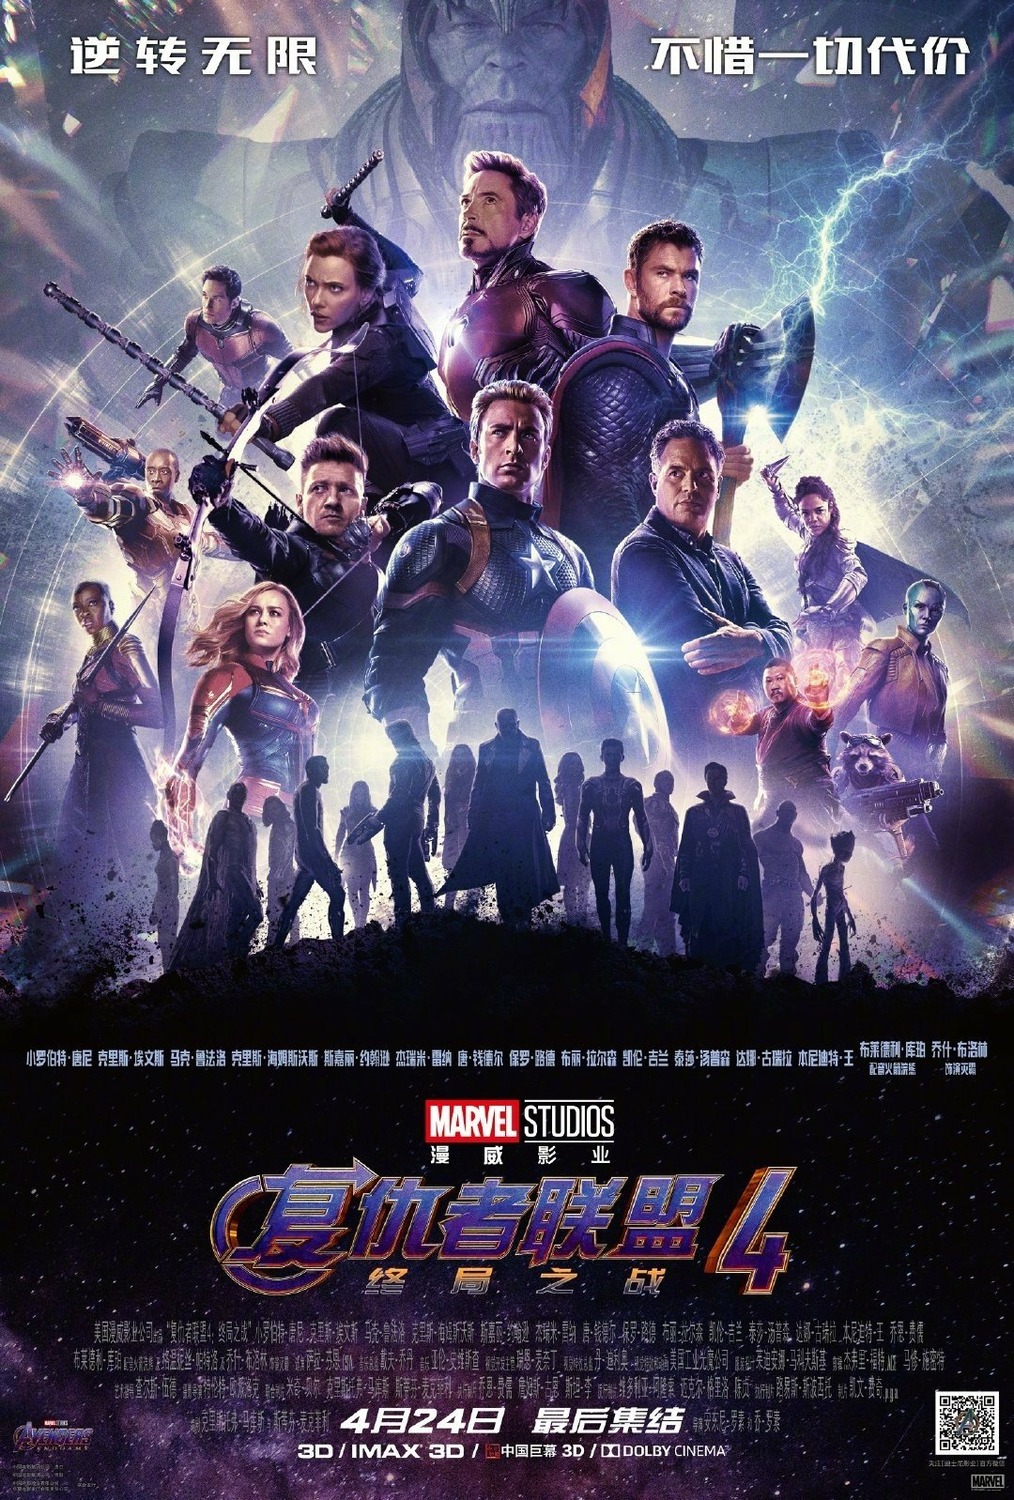 Extra Large Movie Poster Image for Avengers: Endgame (#36 of 62)